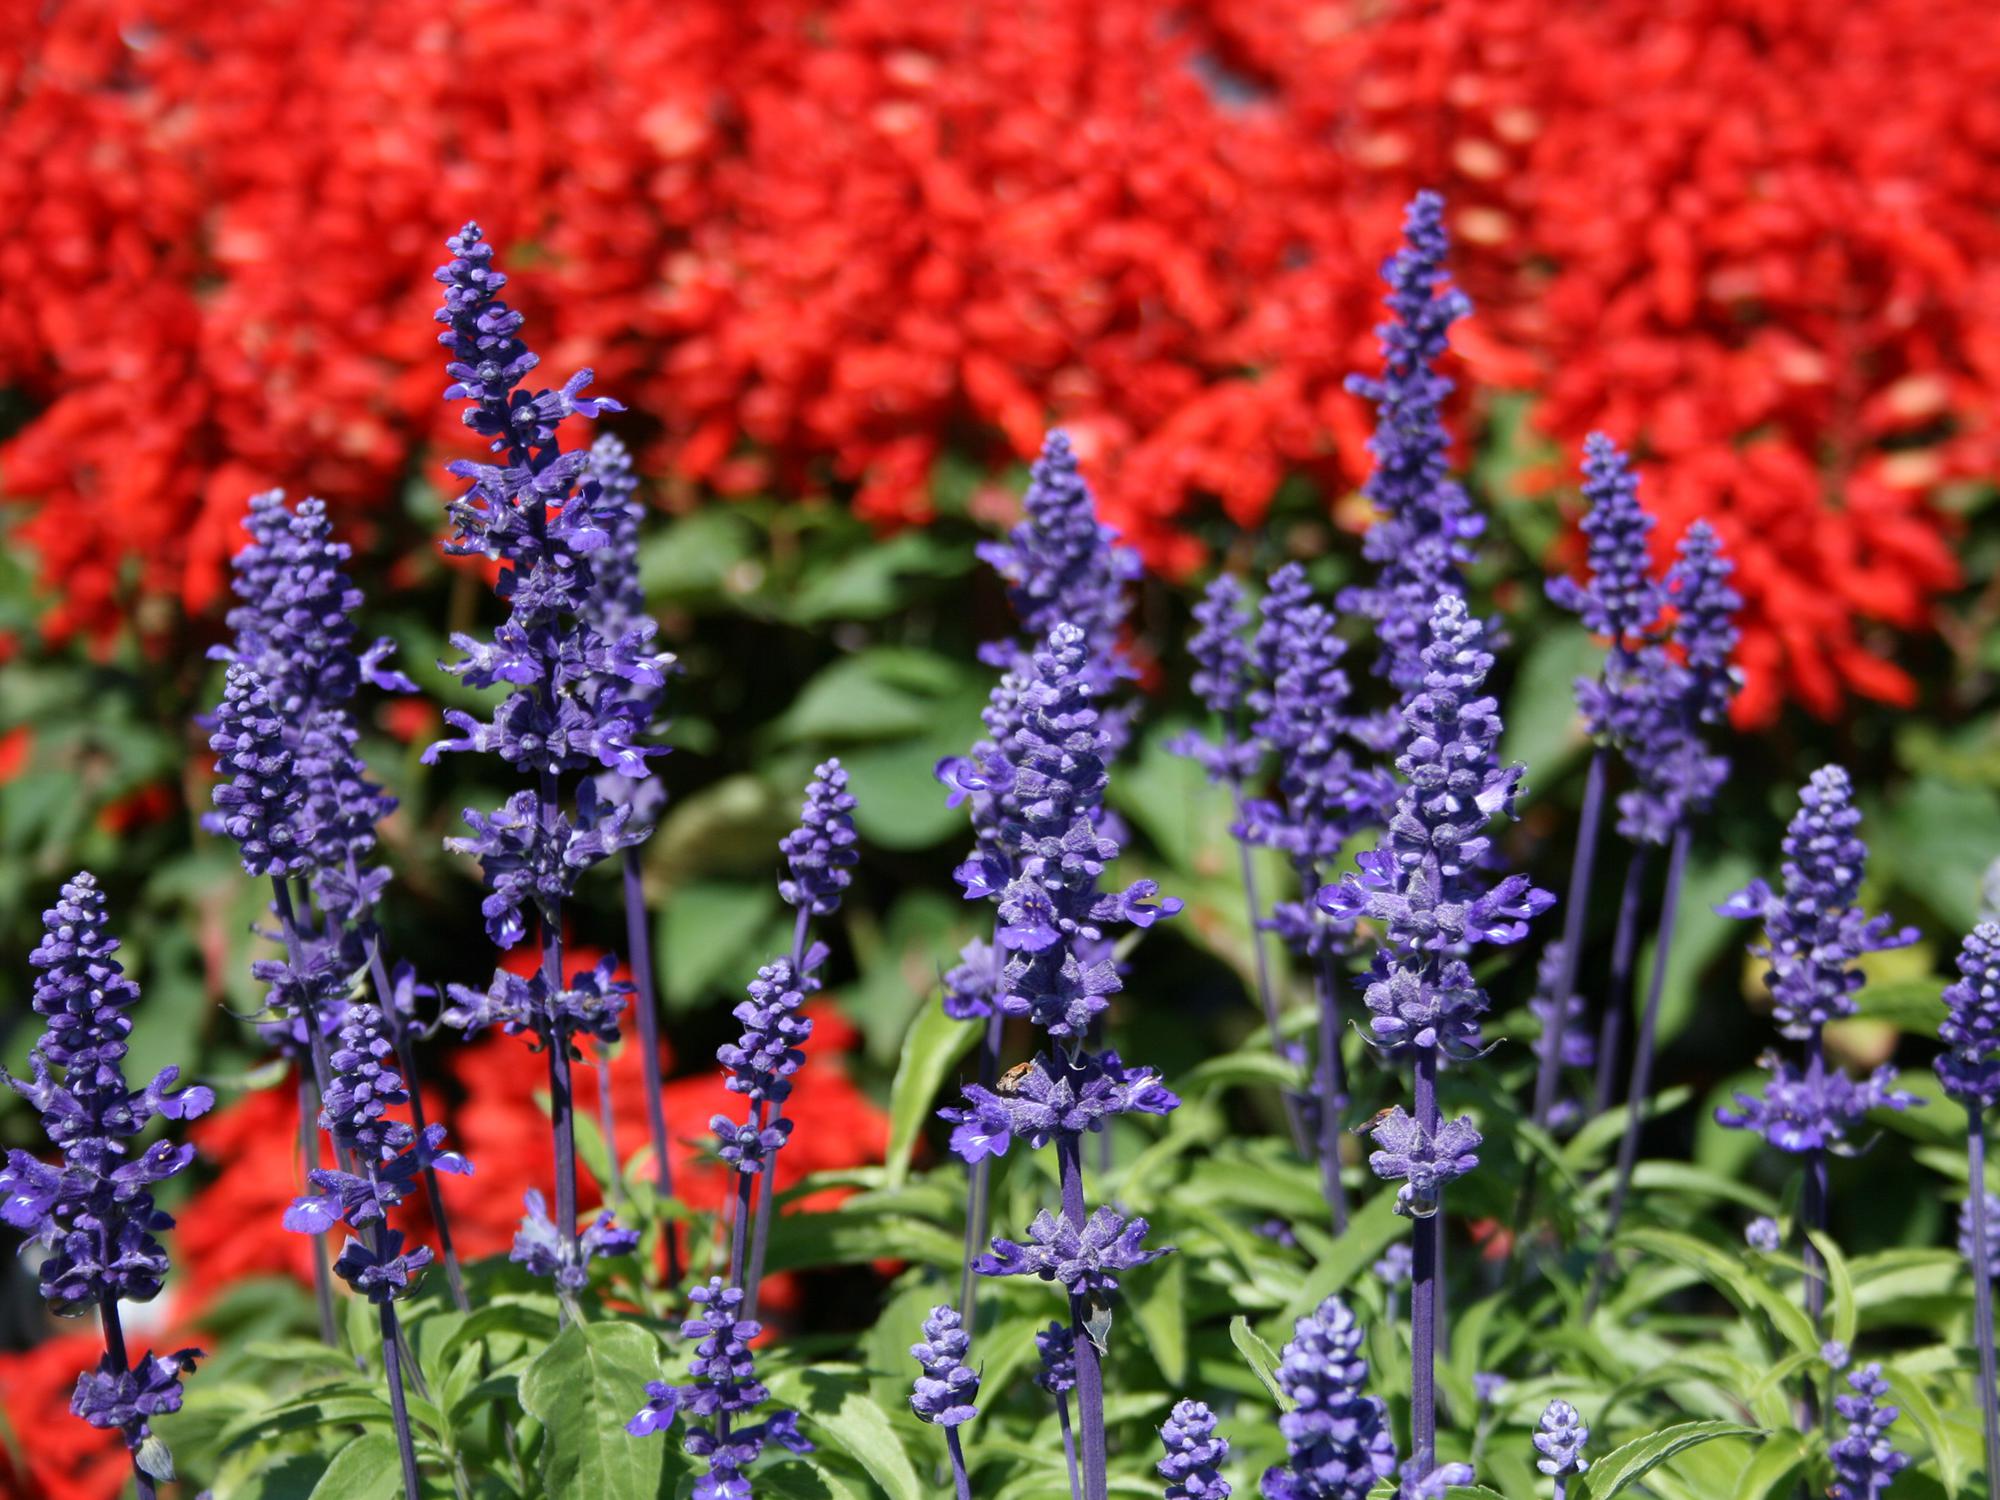 About two dozen upright flowers are in front of sea of red flowers out of focus in the background.